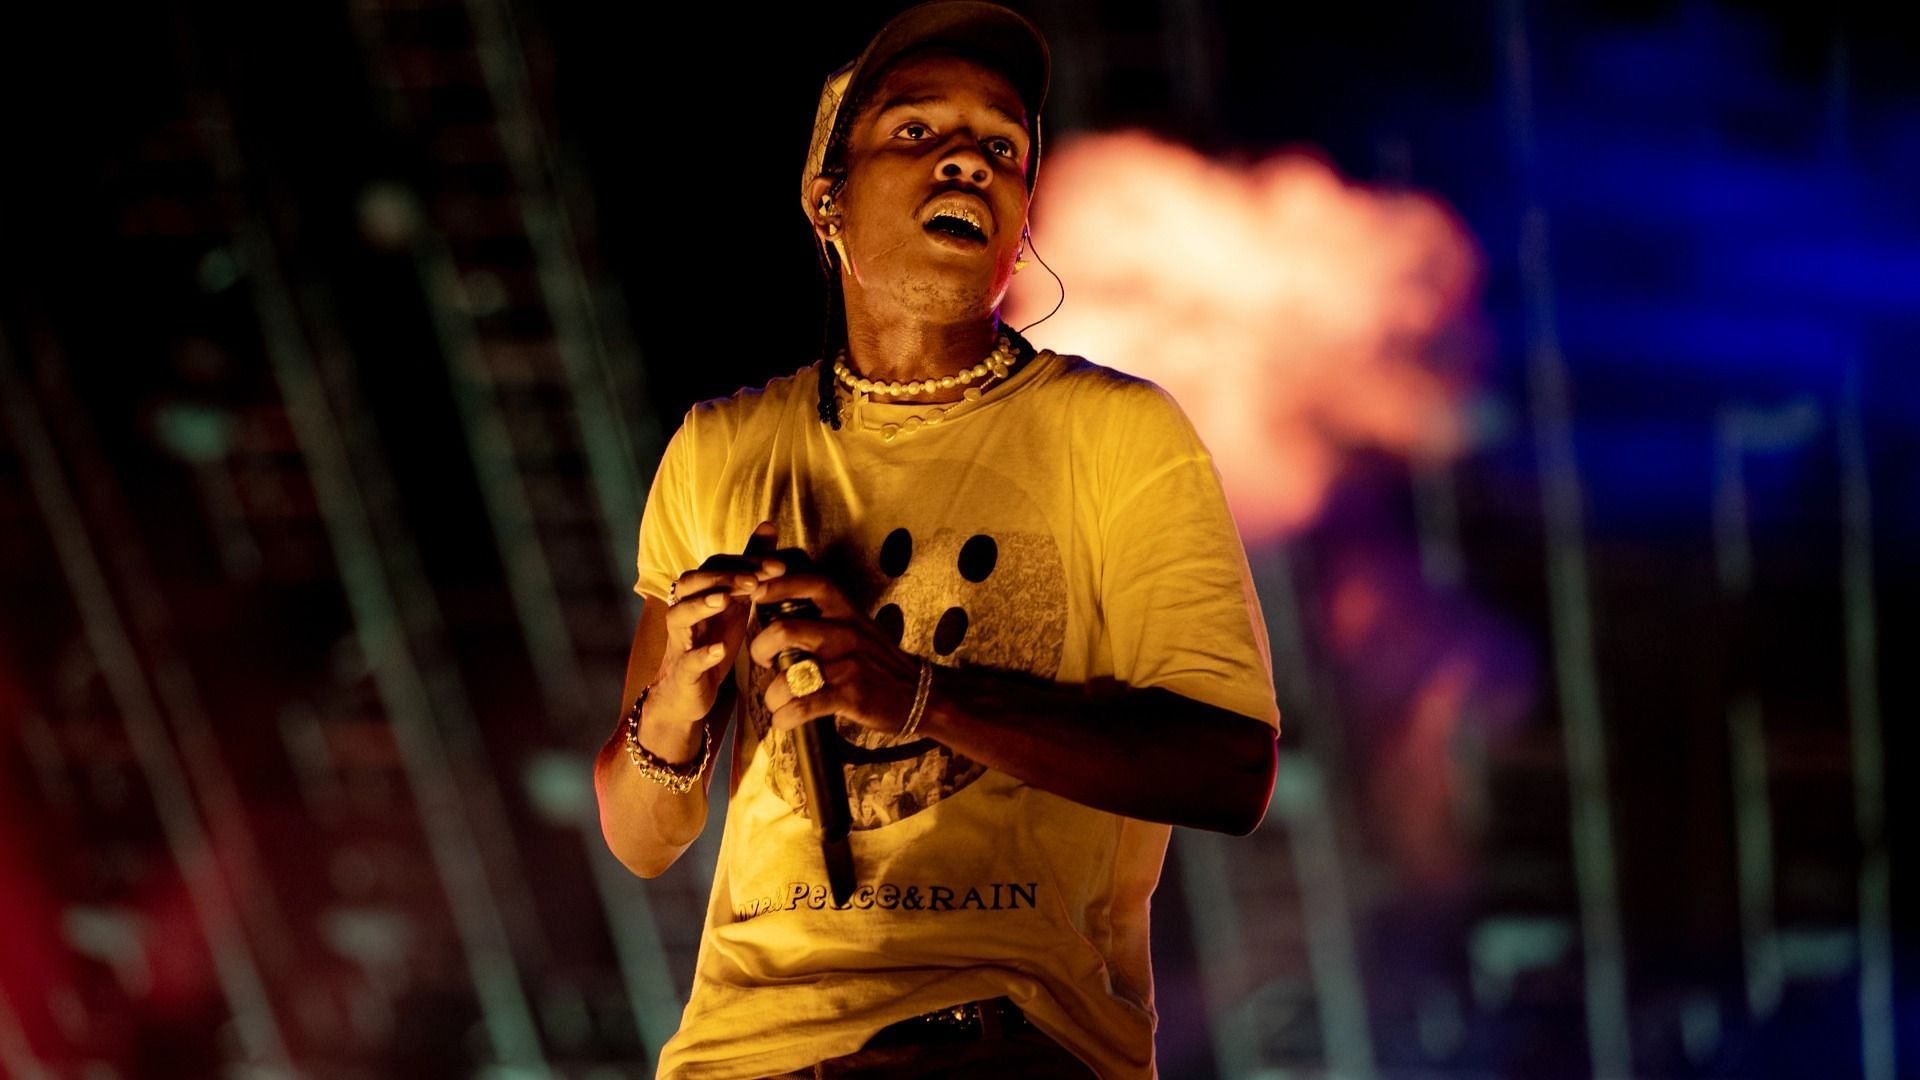 ASAP Rocky was returning from a vacation in Barbados when he was held at Los Angeles International Airport. (Image via Getty Images/Rich Fury)